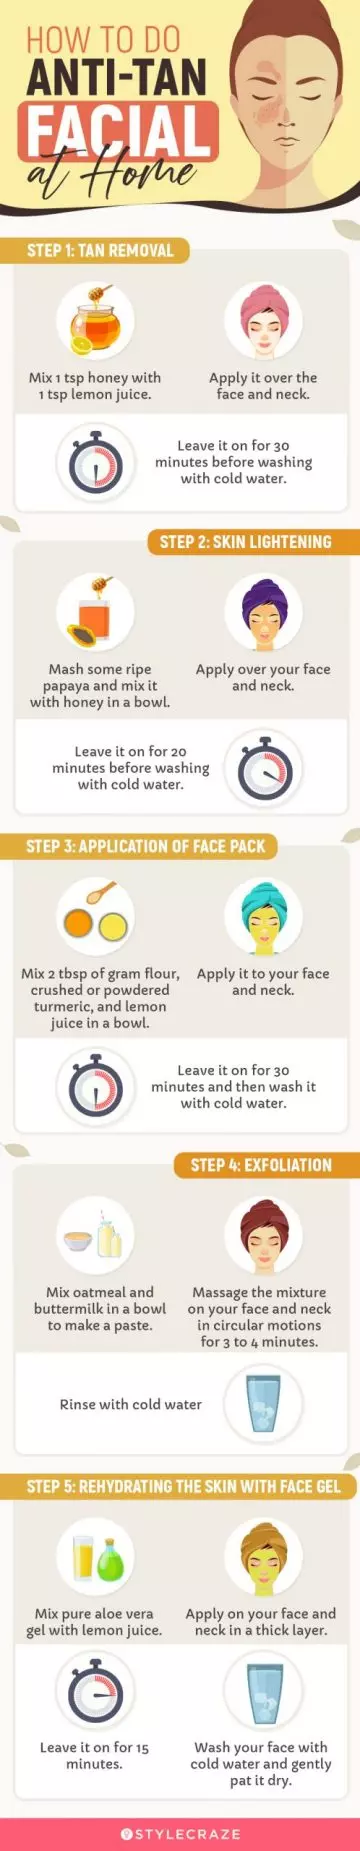 how to do anti-tan facial at home (infographic)